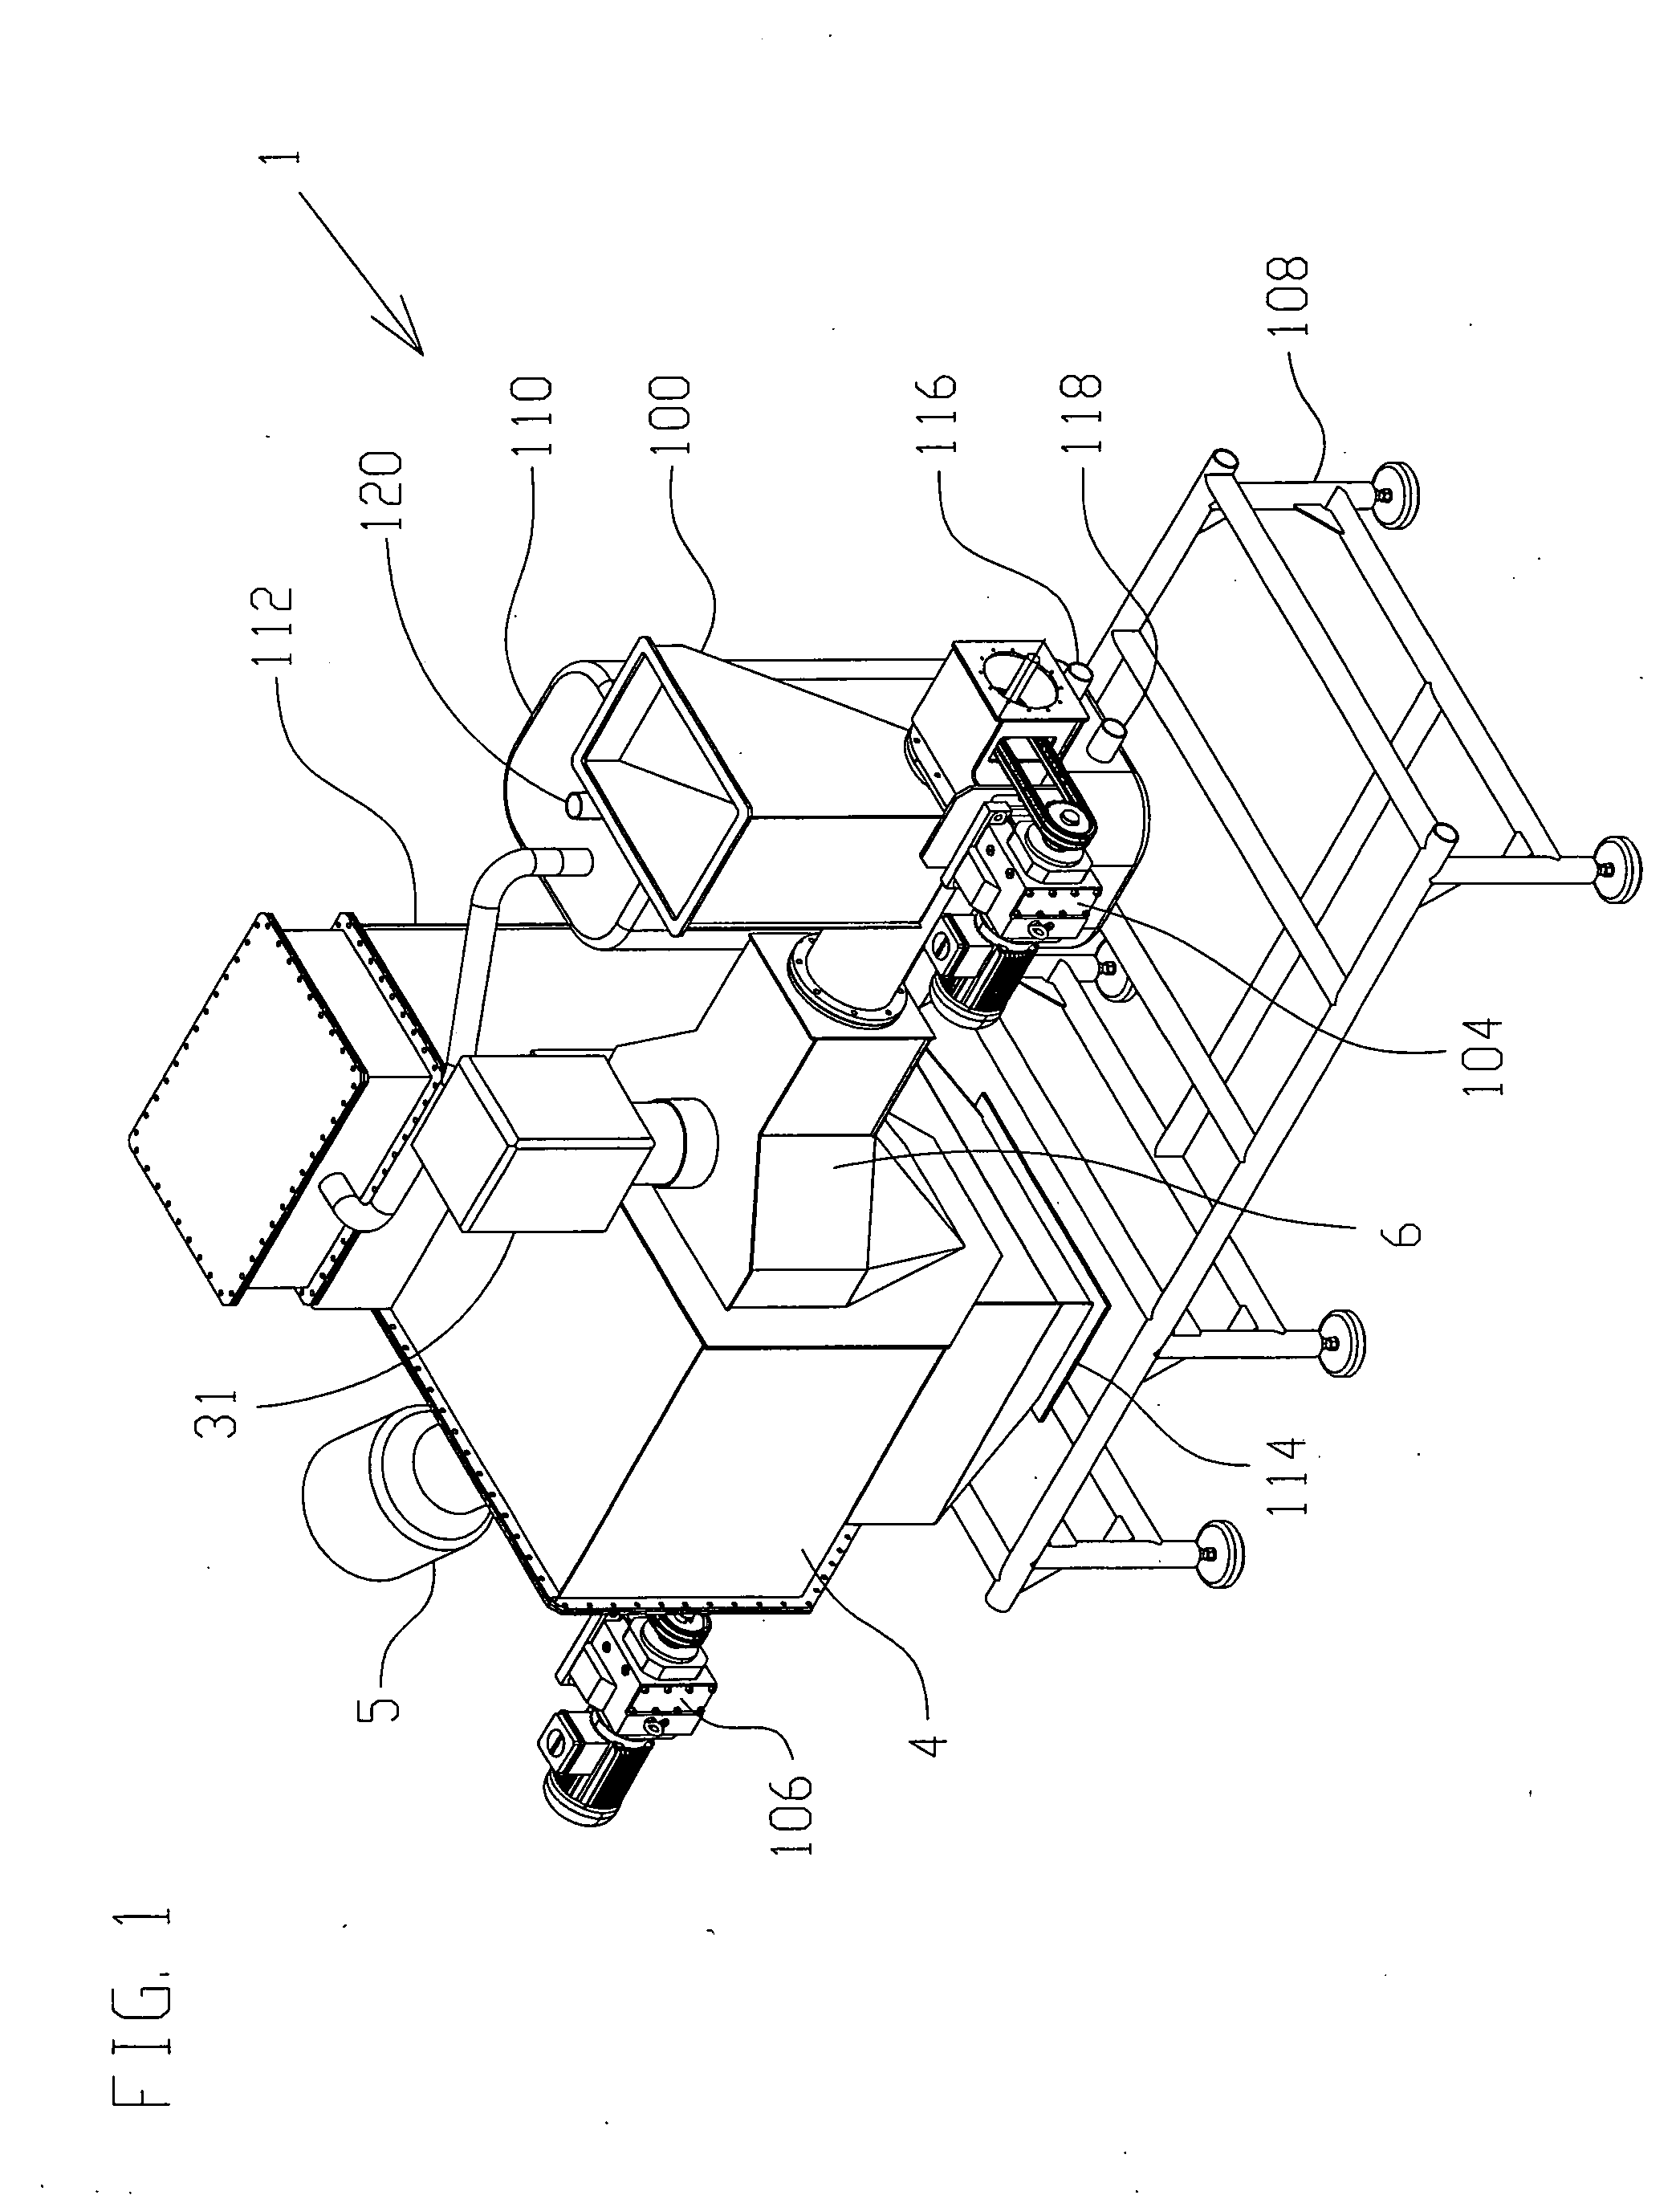 Process and Device for Generating Gas From Carbonaceous Material